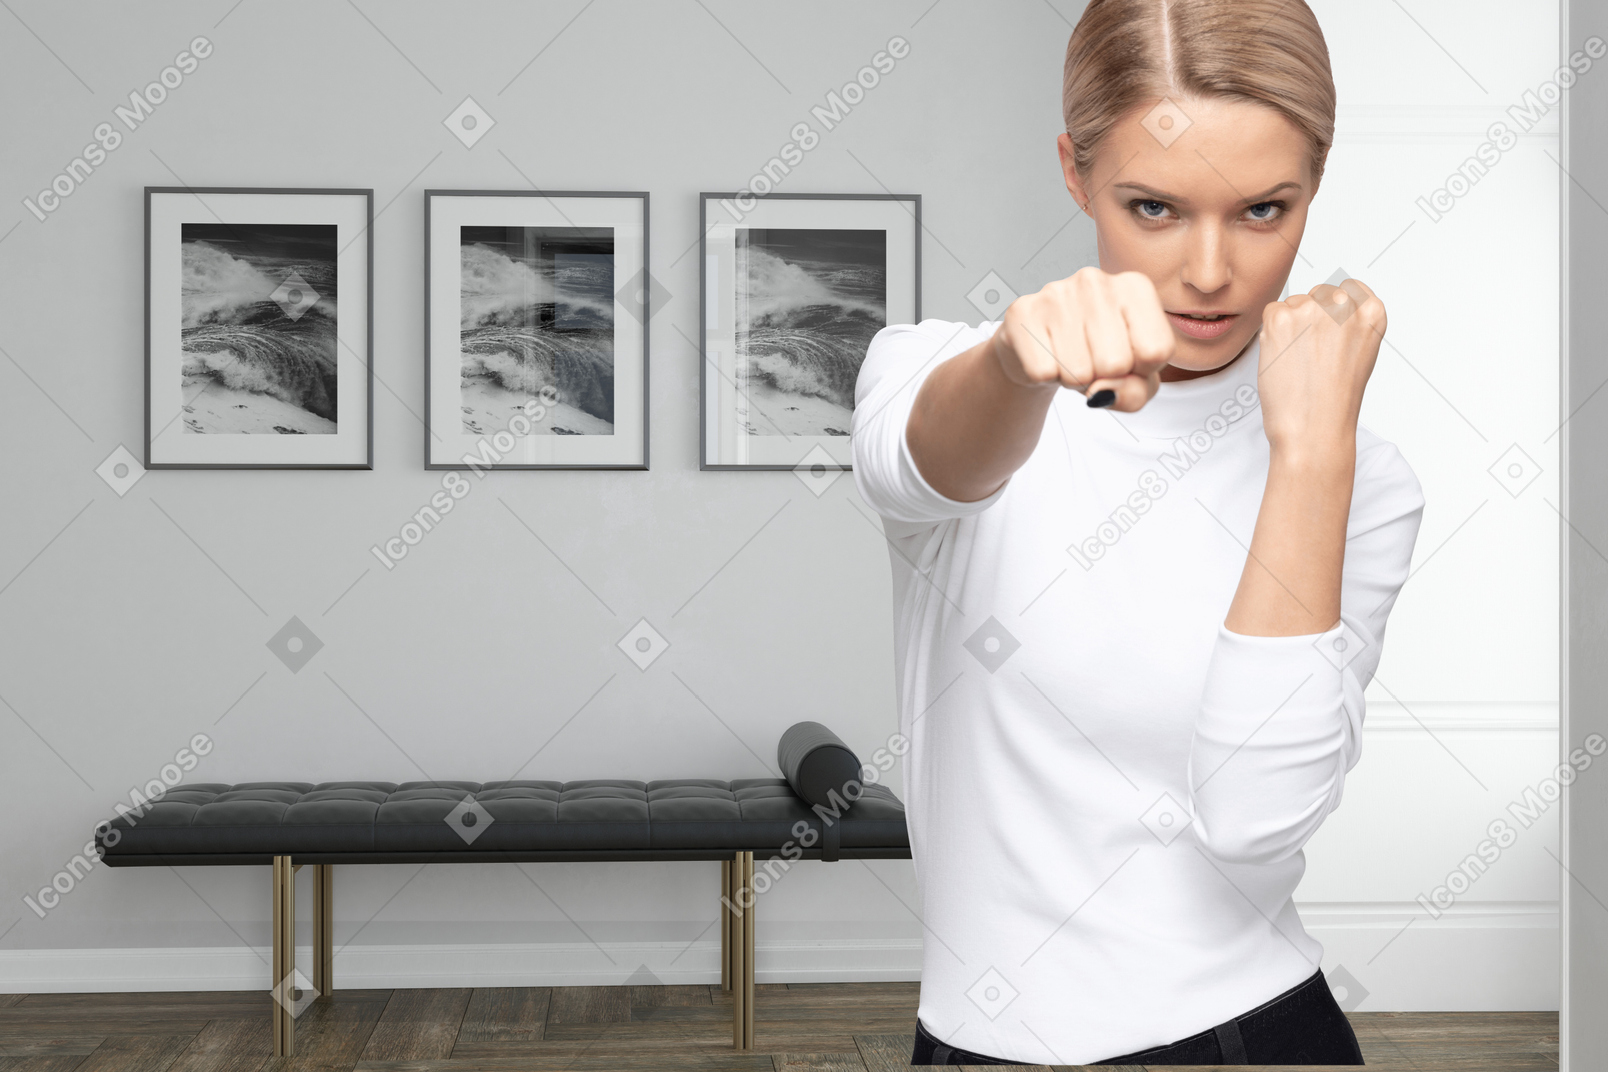 Young woman in white shirt throwing a punch